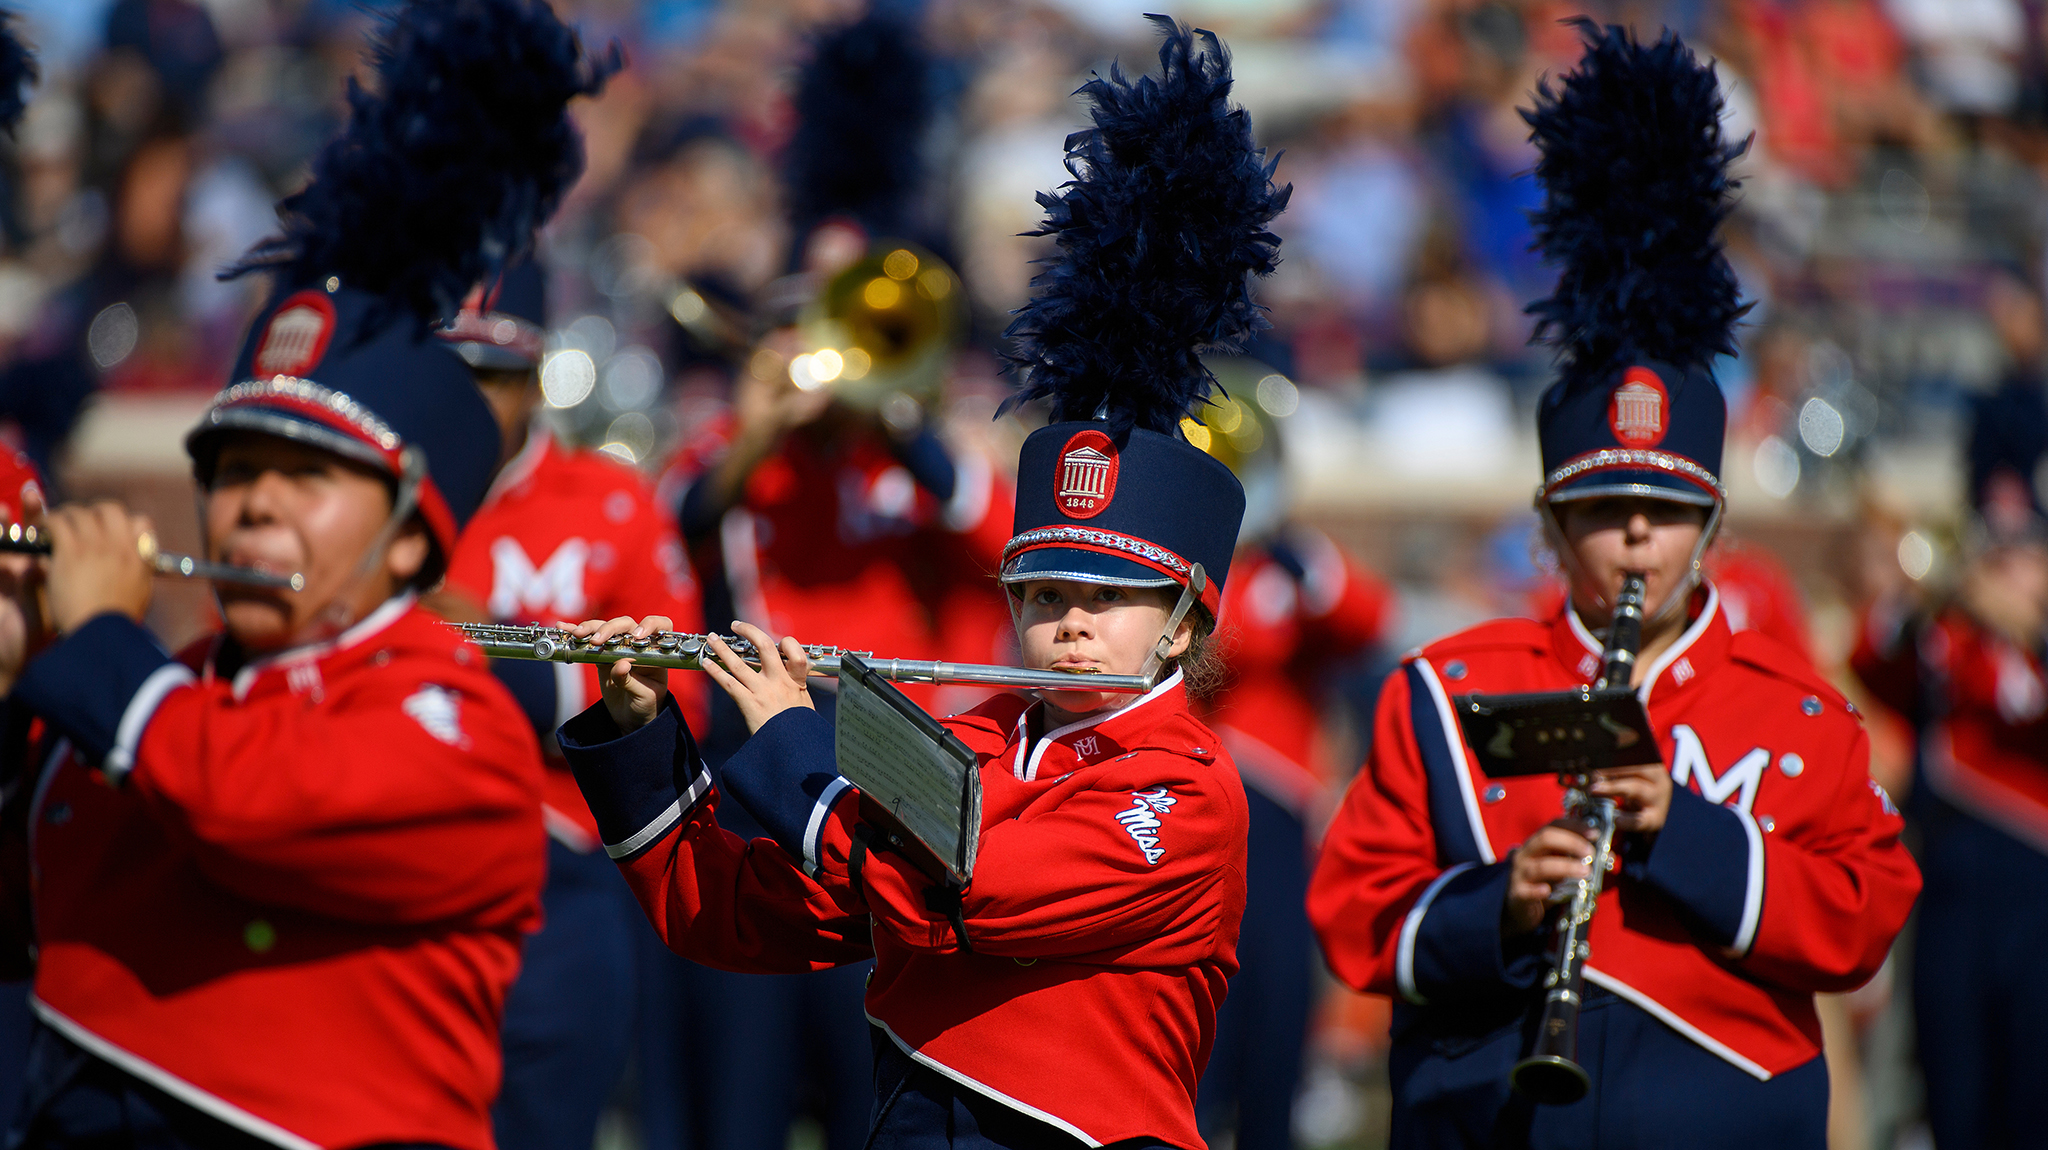 The Pride of the South marching band performs at halftime of the 2021 Ole Miss-Arkansas football game in Vaught-Hemingway Stadium